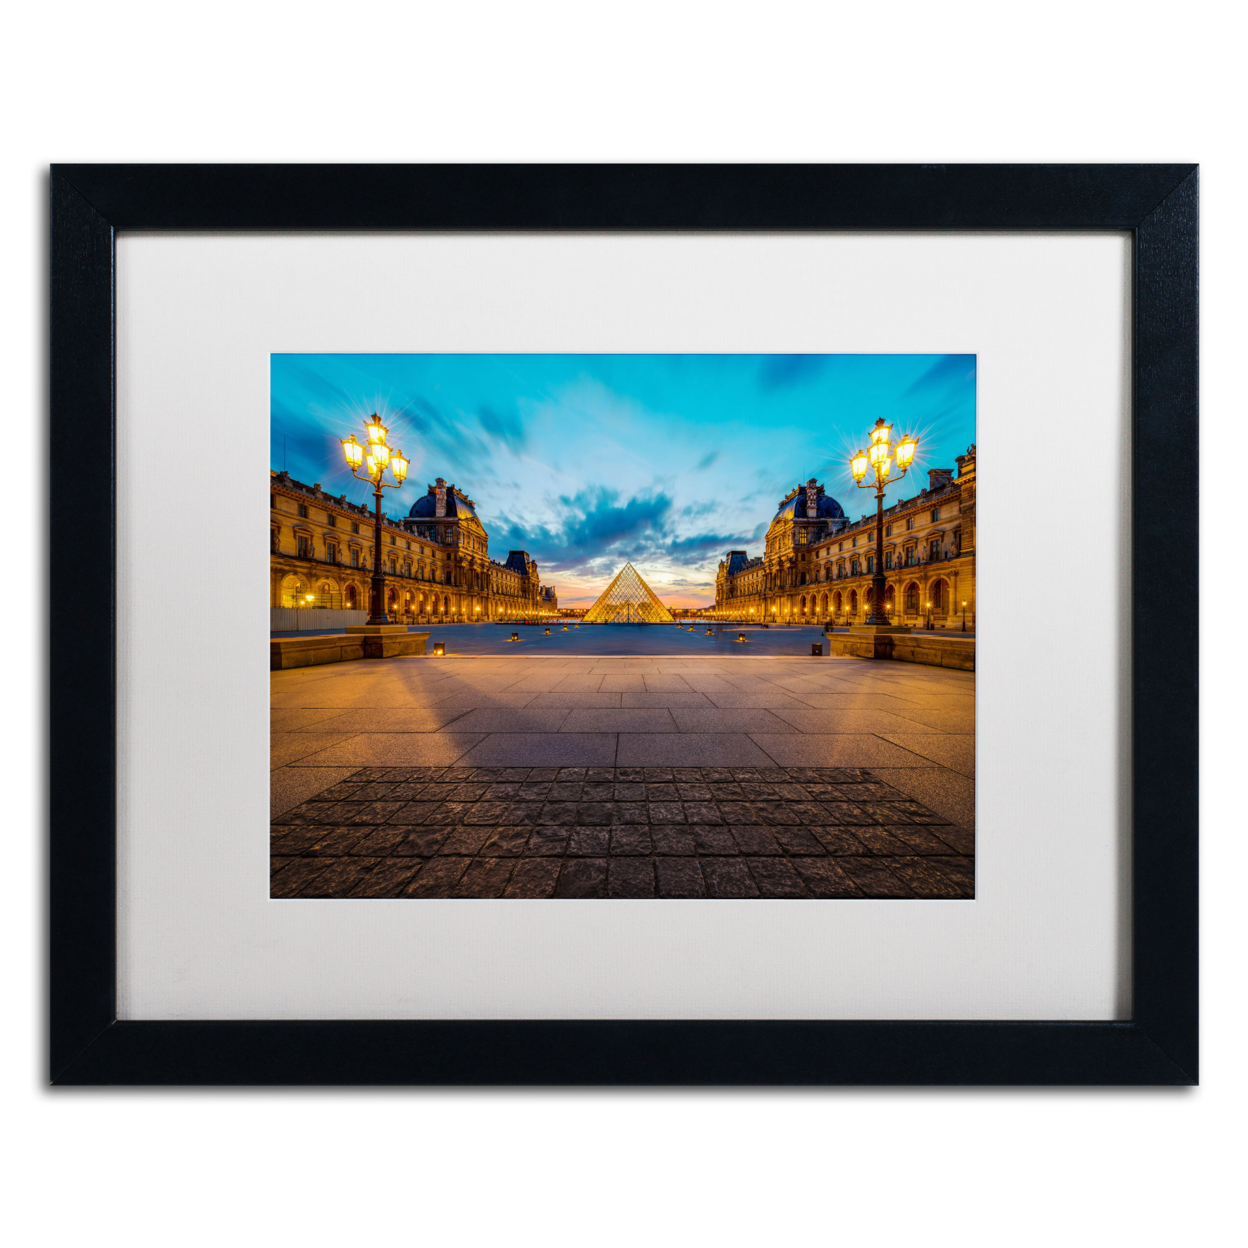 Mathieu Rivrin 'Blue Hour From The Louvre' Black Wooden Framed Art 18 X 22 Inches